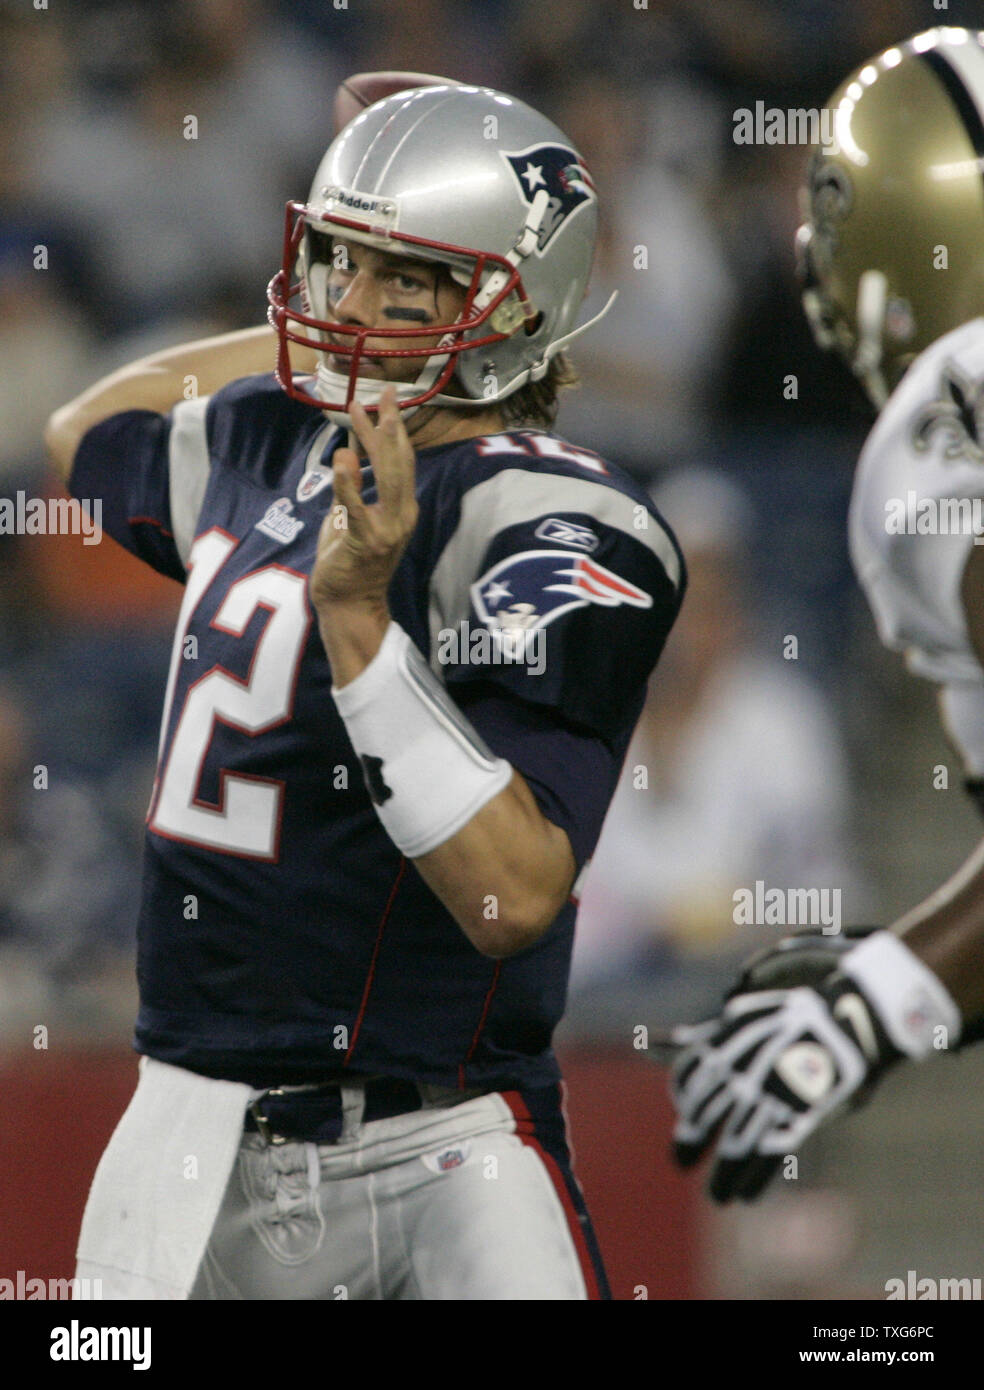 New England Patriots quarterback Tom Brady passes against the New Orleans Saints in the first quarter of preseason action at Gillette Stadium in Foxboro, Massachusetts on August 12, 2010.      UPI/Matthew Healey Stock Photo